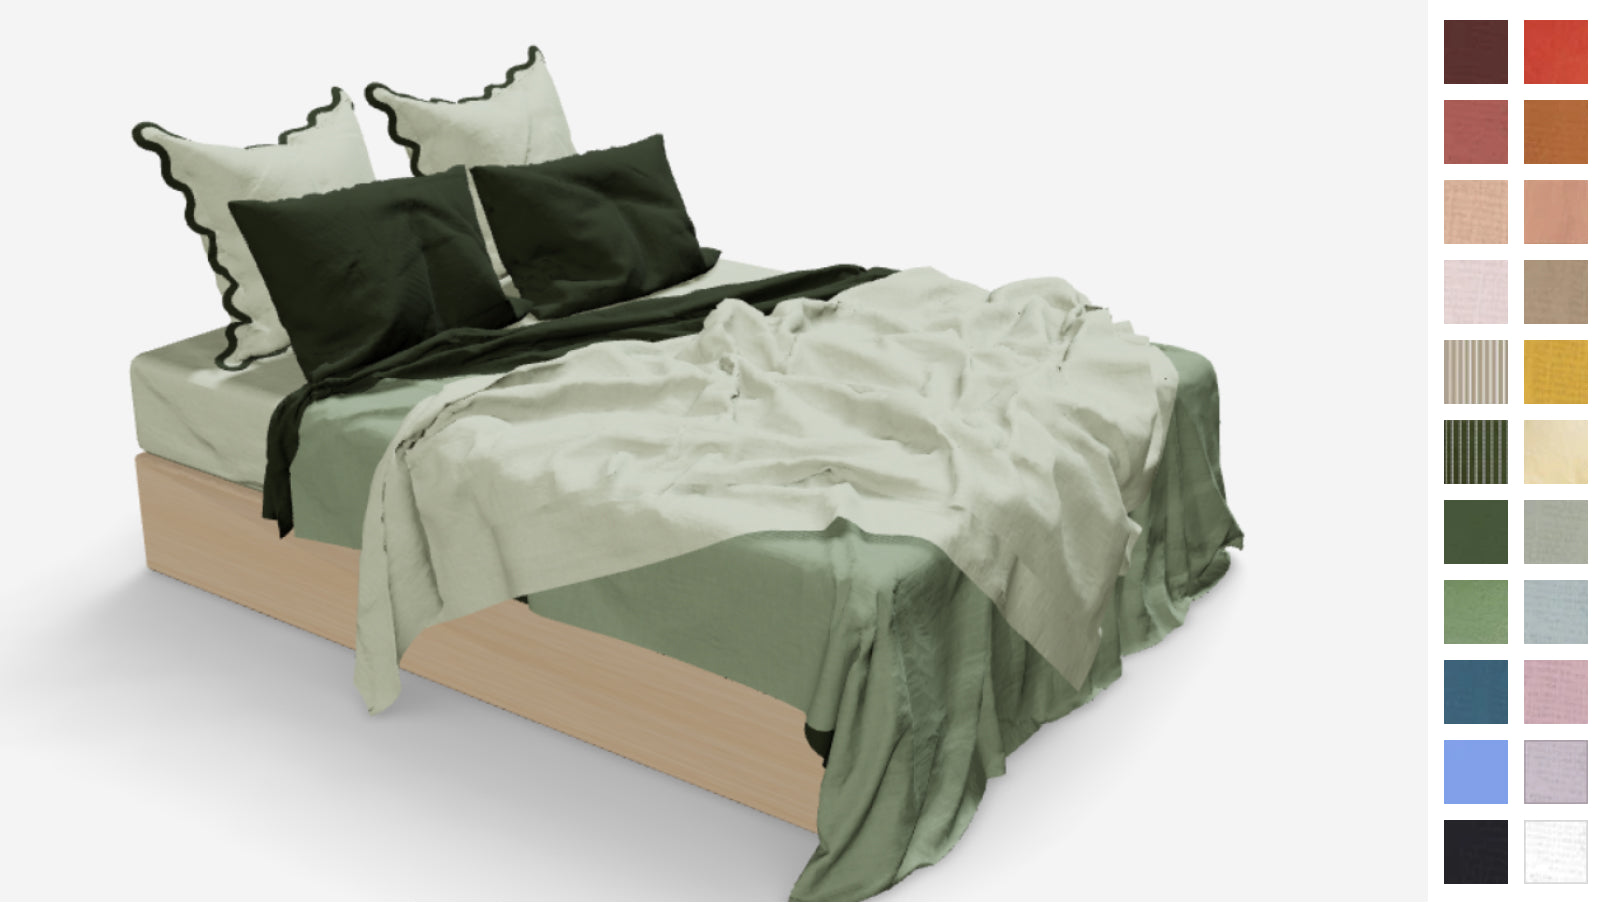 Do You Have To Use a Fitted and Flat Sheet on Your Bed? - Review by Old  House Journal